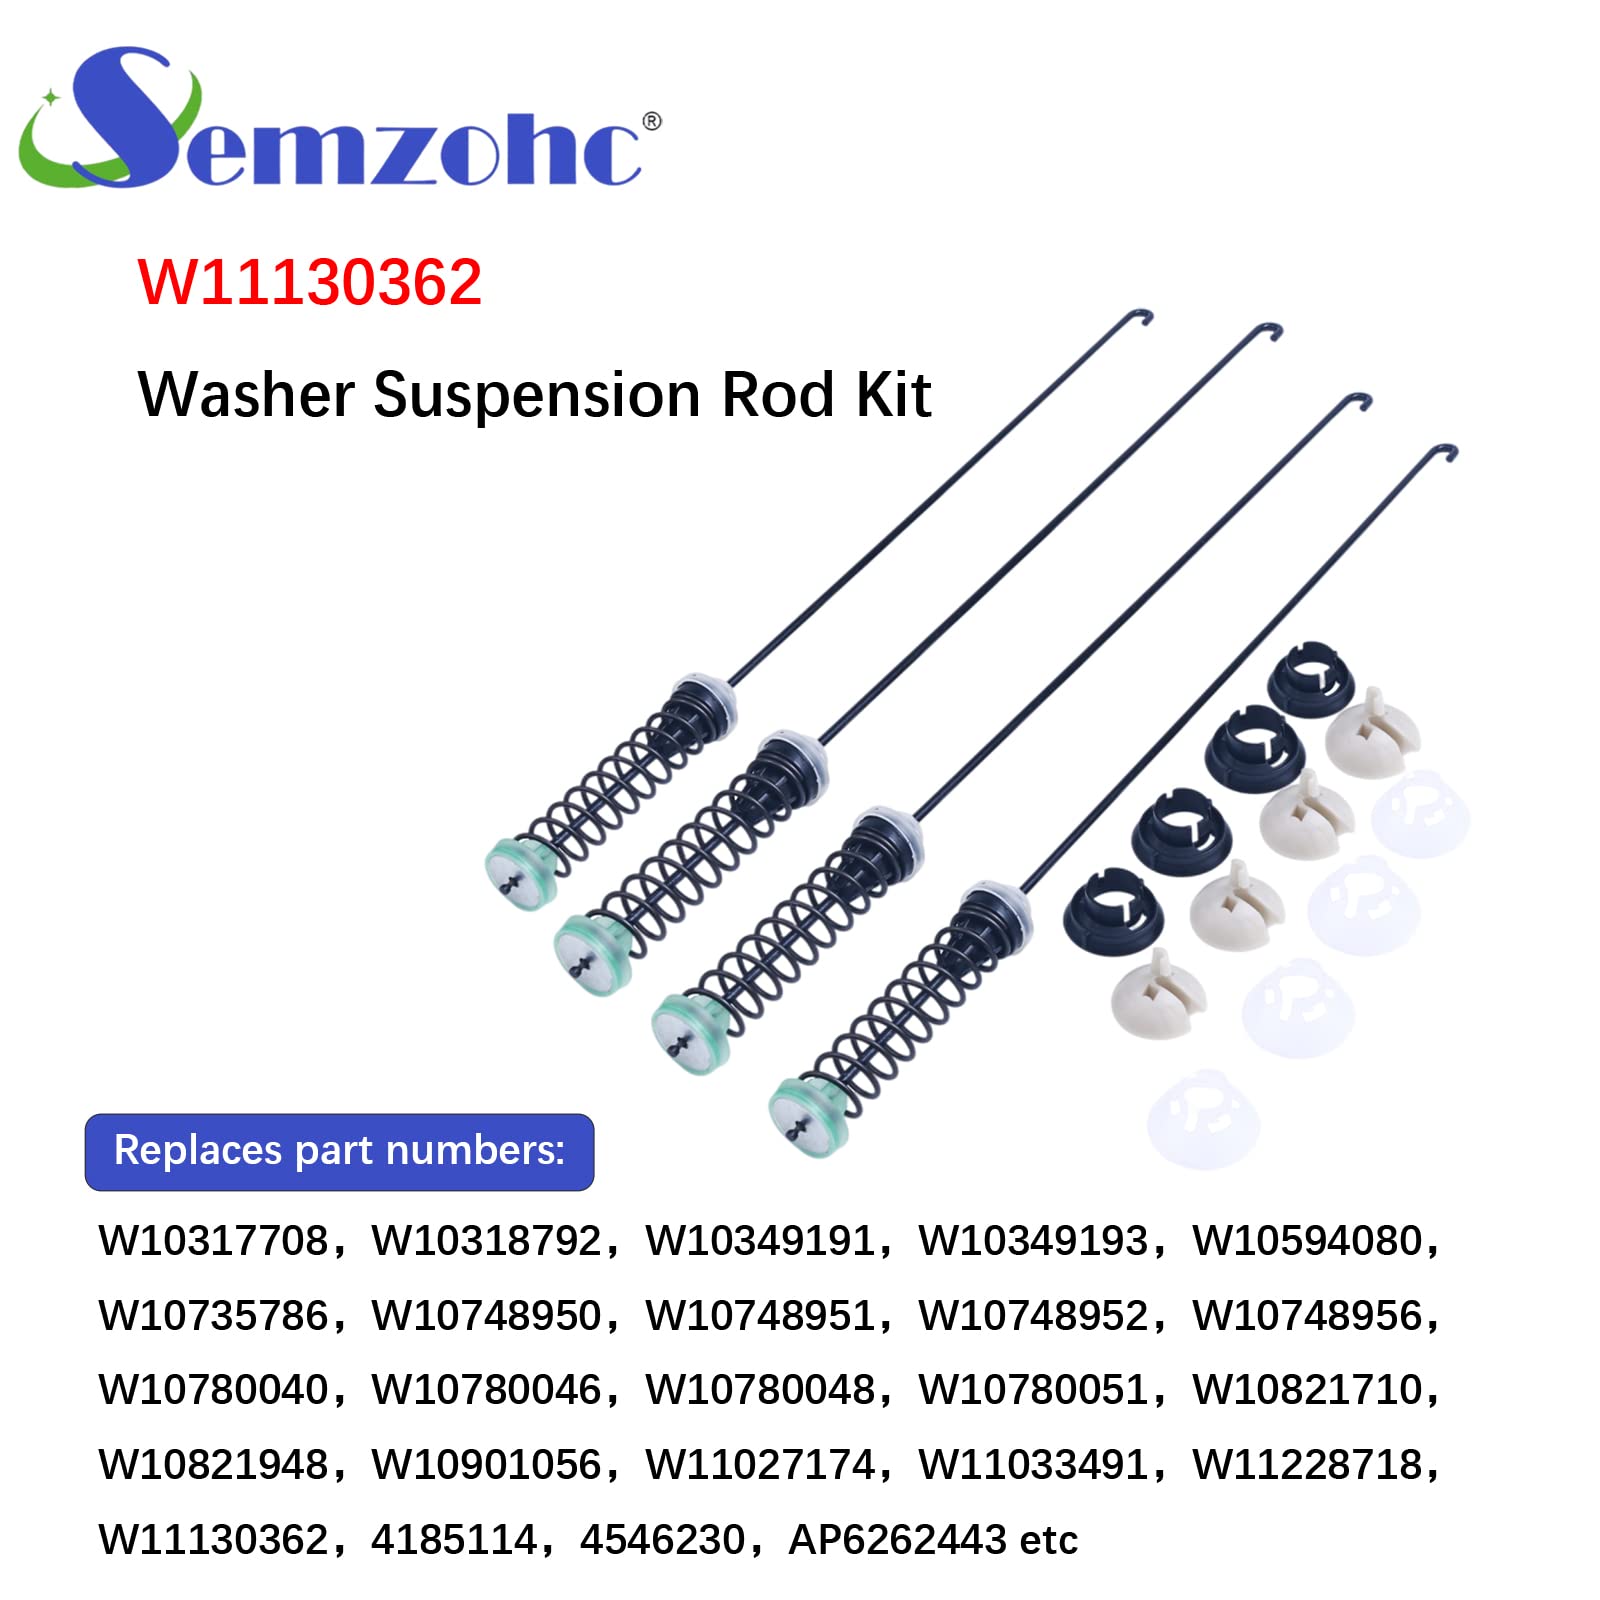 W11130362 WTW5000DW2 Washer Suspension Rod Kit replacement part,Washer Parts replaces 11022352510, MVWC565FW0, WTW5000DW0, WTW5000DW2 Compatible with Whirlpool Maytag Kenmore Amana Washing Machines